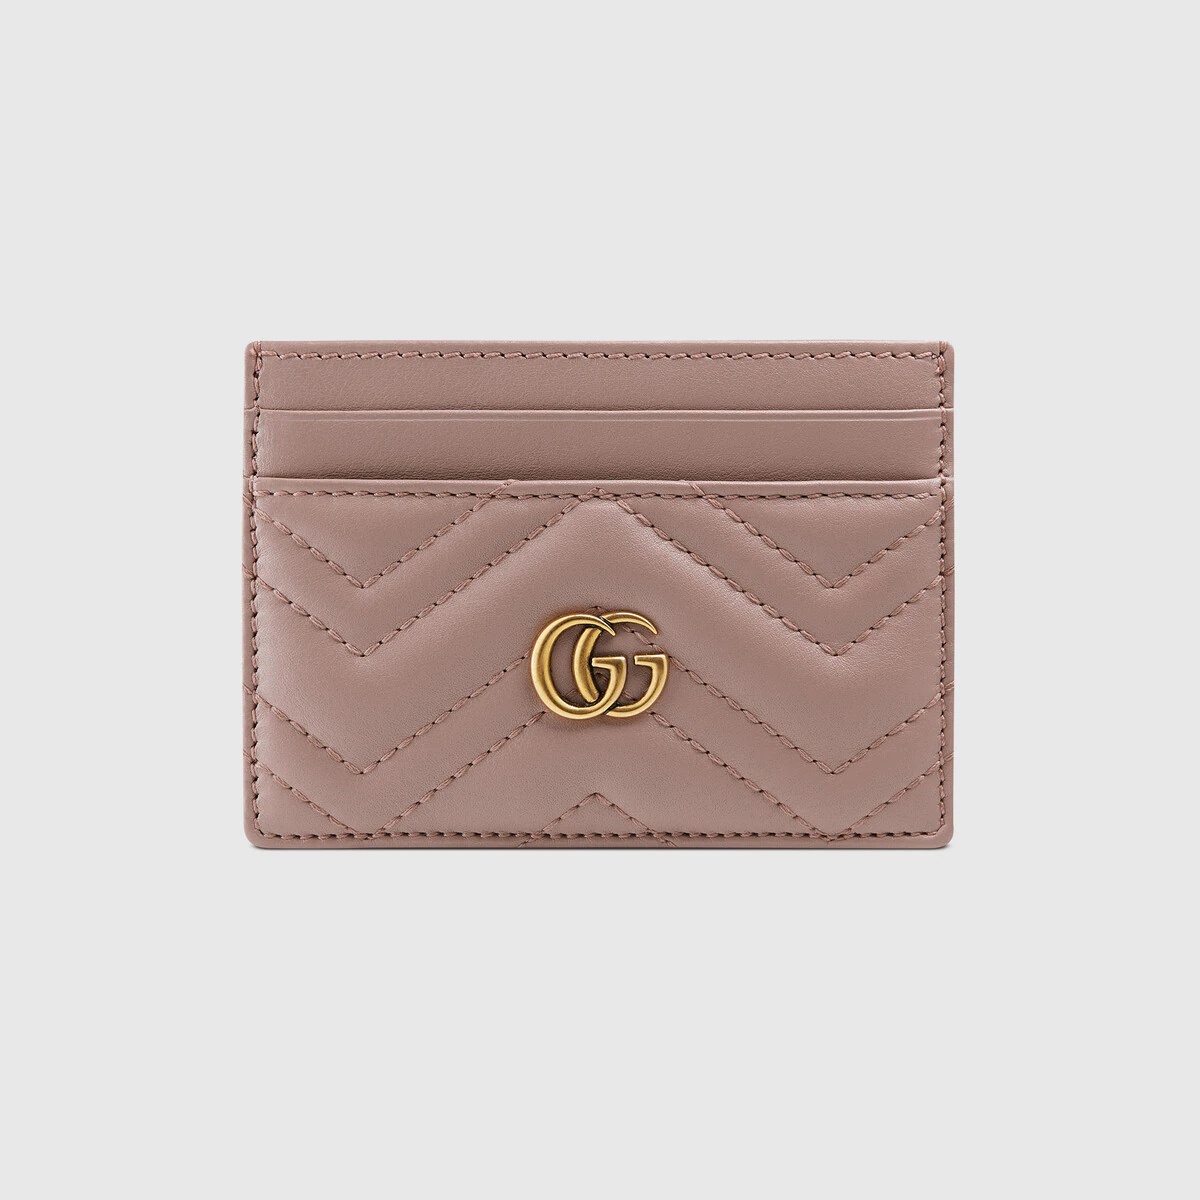 GG Marmont card case - 1